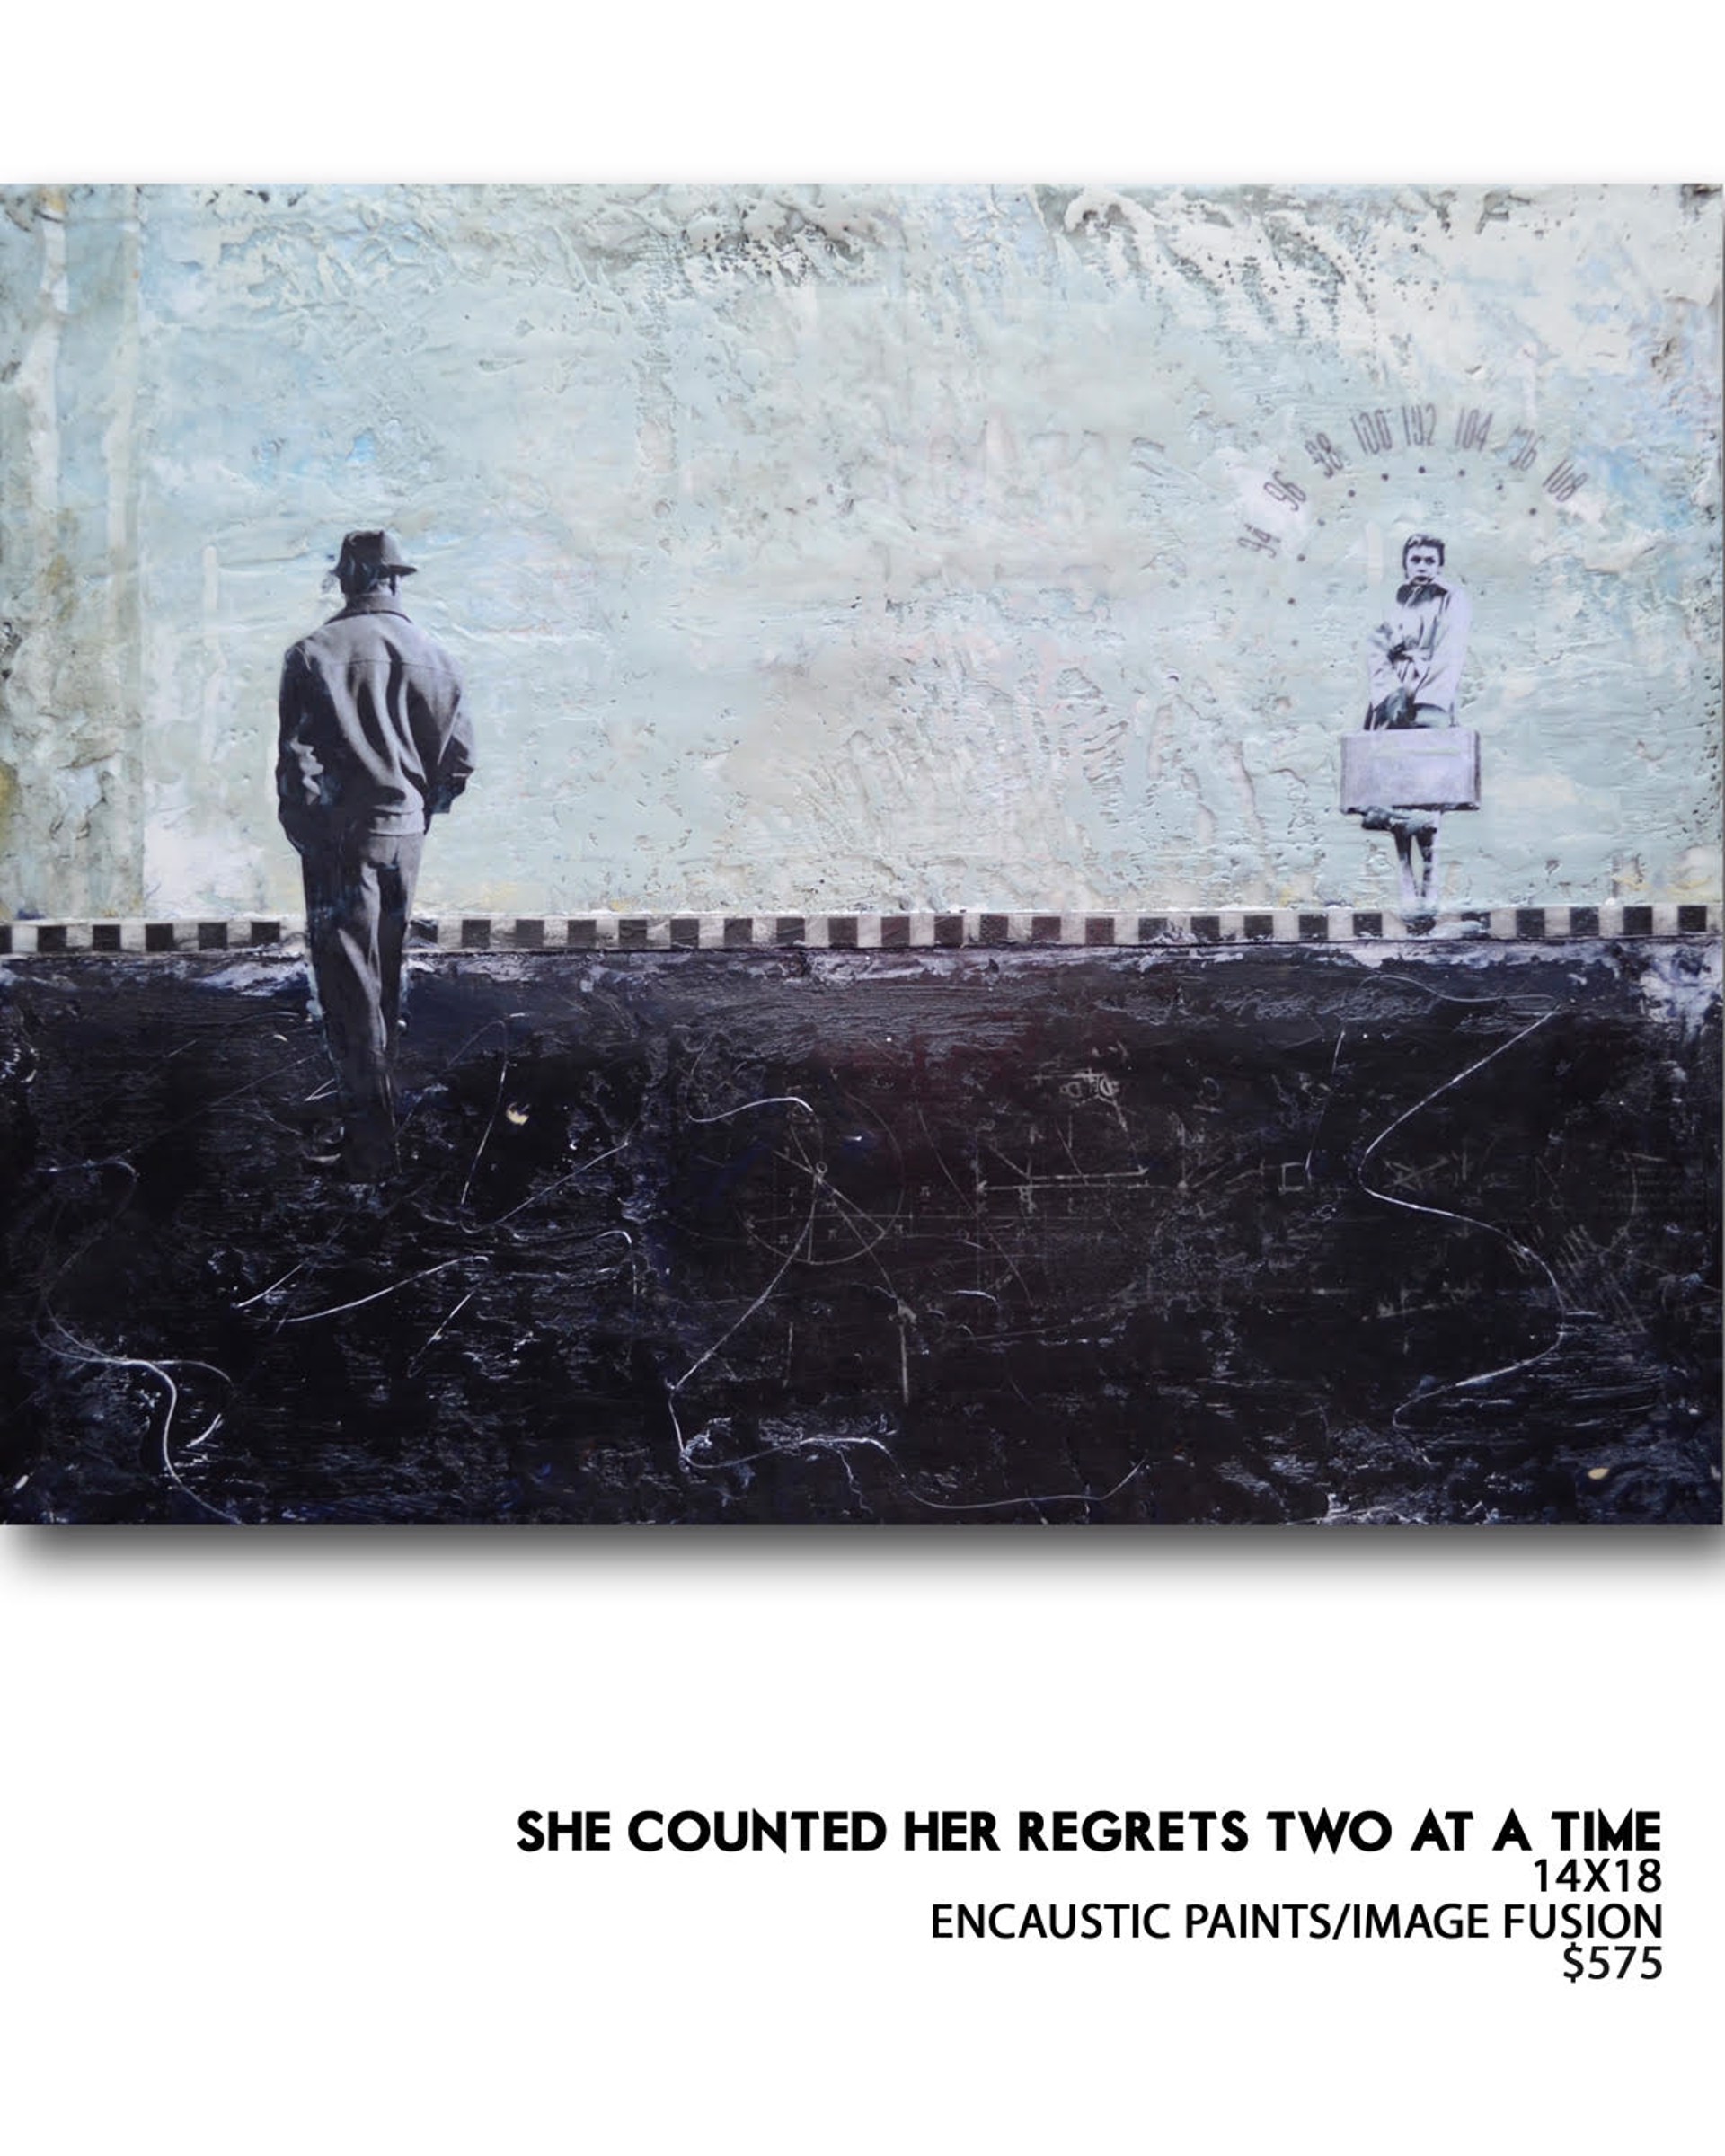 She Counted Her Regrets Two at a Time by Ruth Crowe